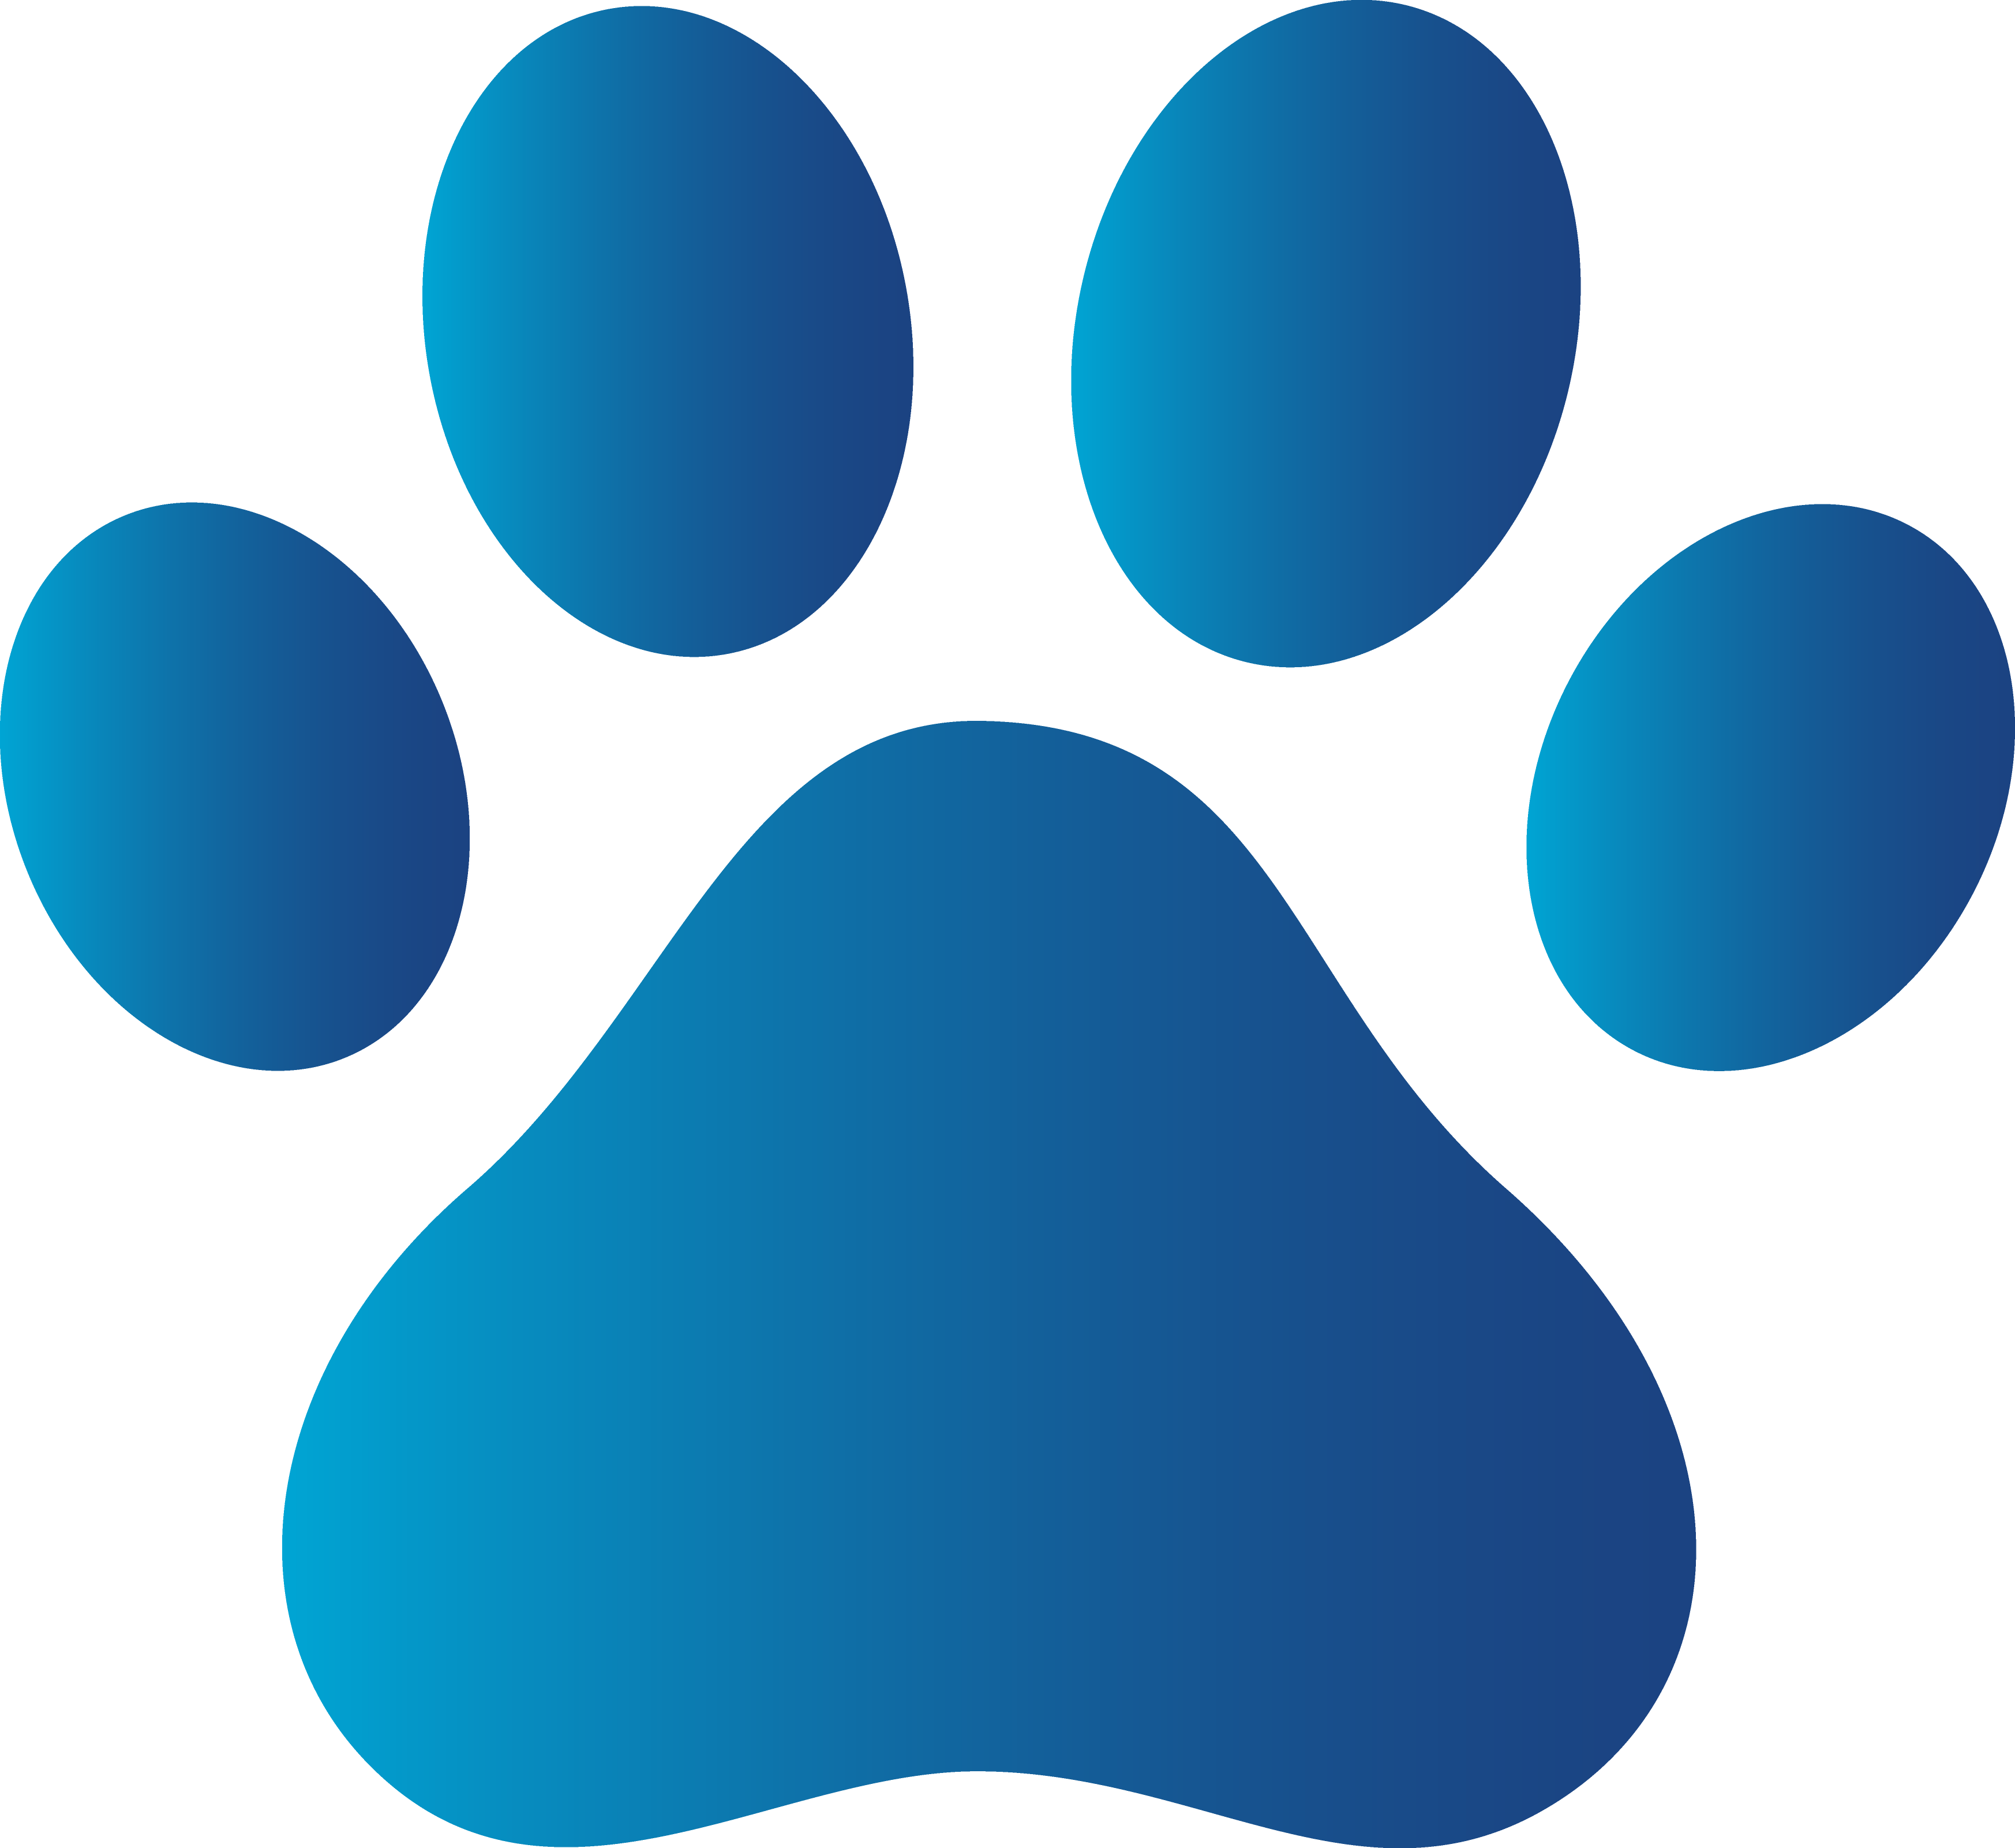 Best Photos of Paw Print Graphic - Cat Paw Prints, Blue Dog Paw ...